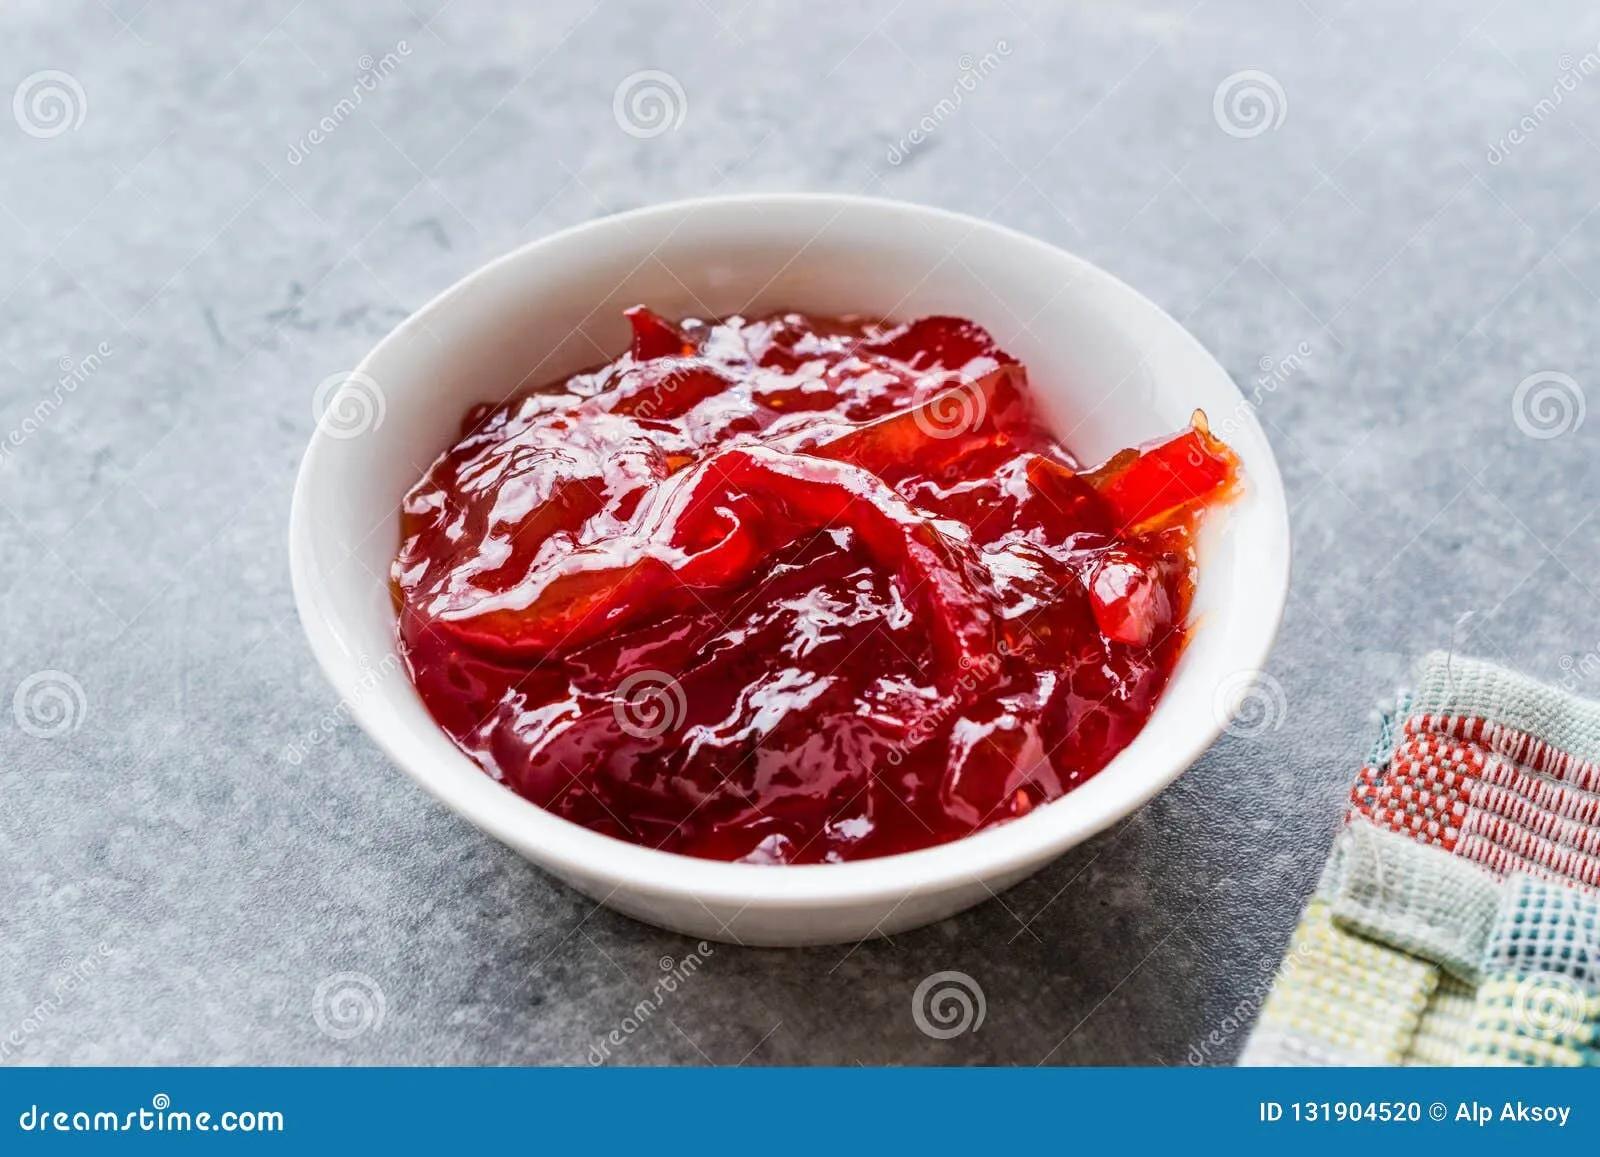 Red Pepper Jam in Small Bowl / Marmalade Stock Photo - Image of sweet ...